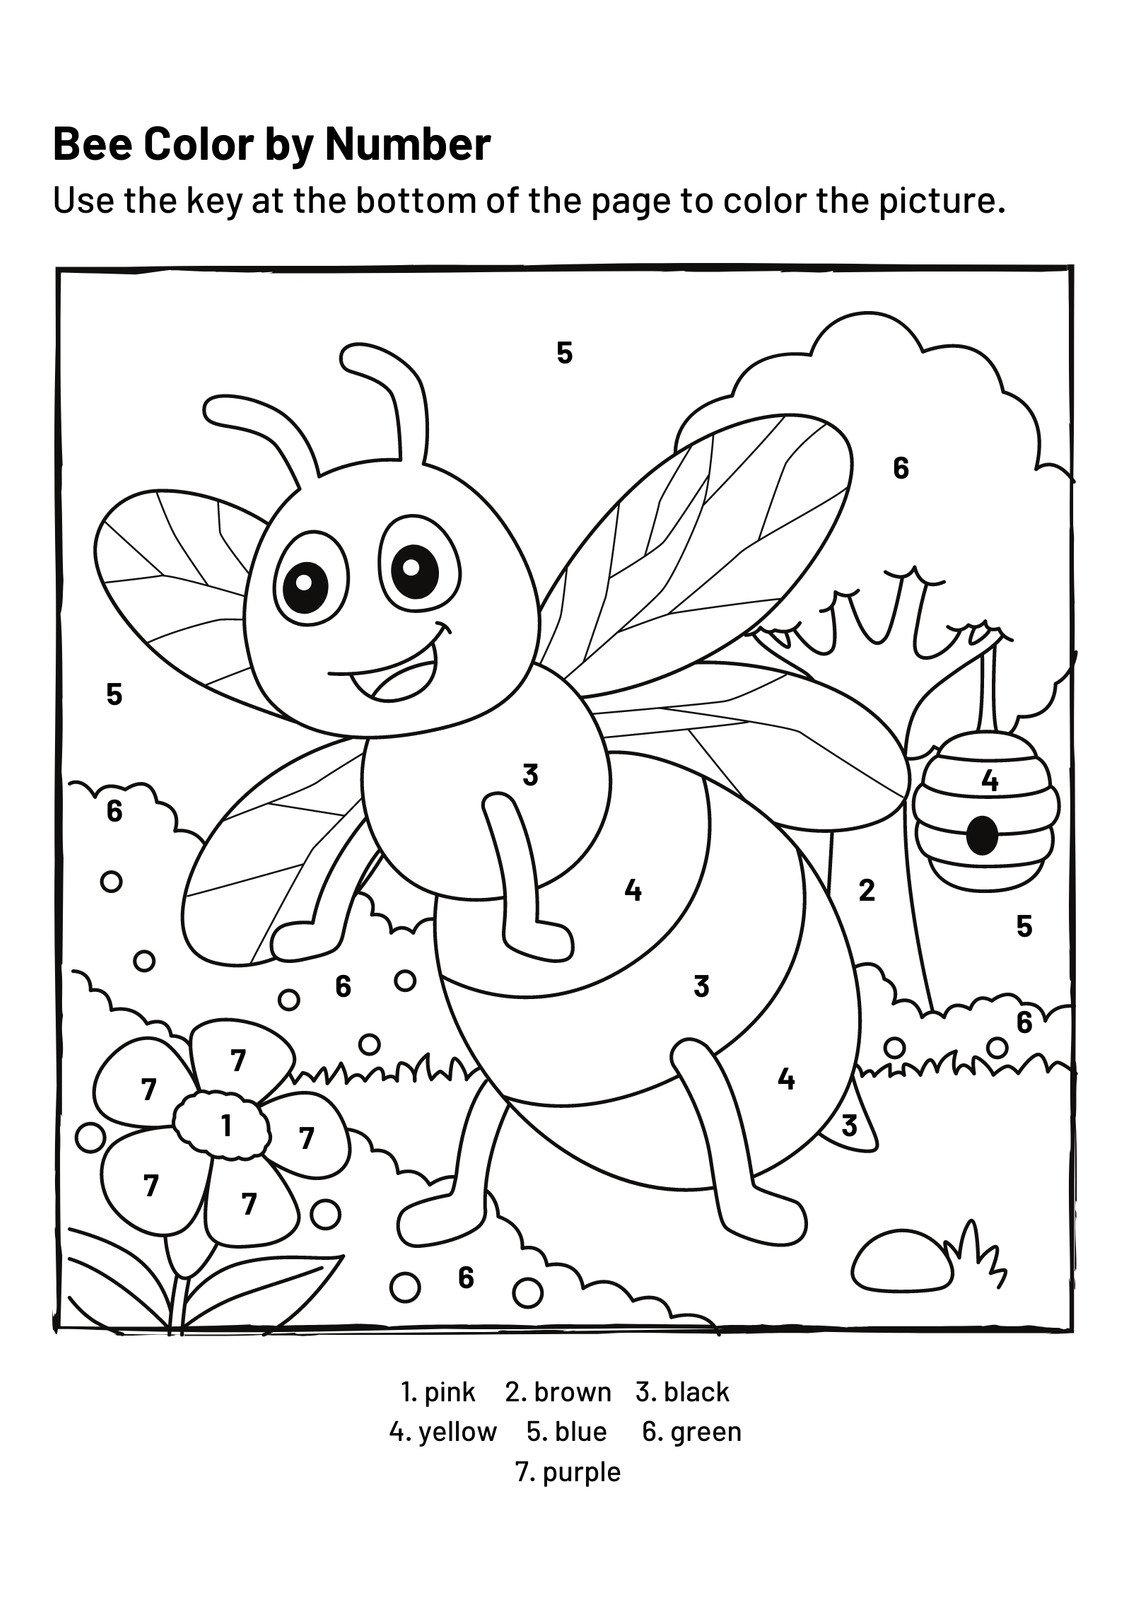 Free printable coloring page templates to customize   Canva